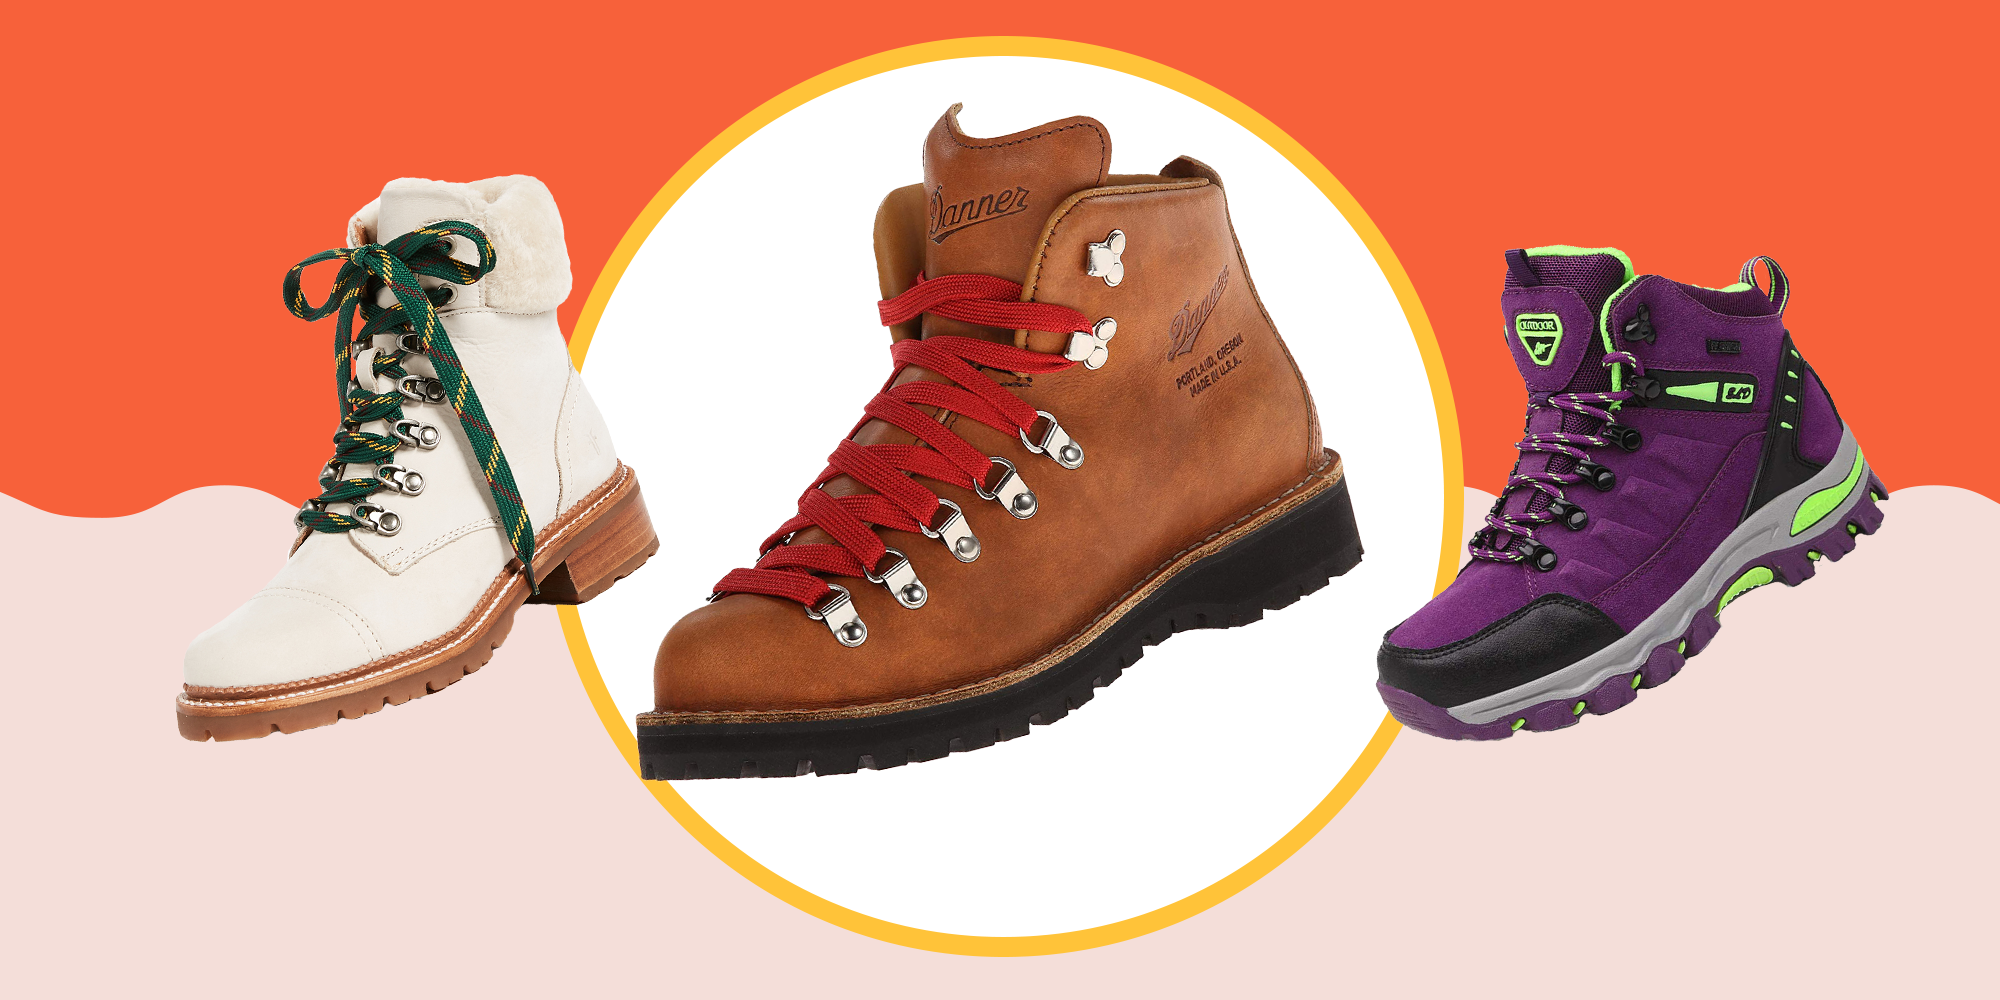 Top Hiking Shoes & Boots for Women — Flying Dawn Marie | Travel blog,  guides & itineraries for adventurous travellers